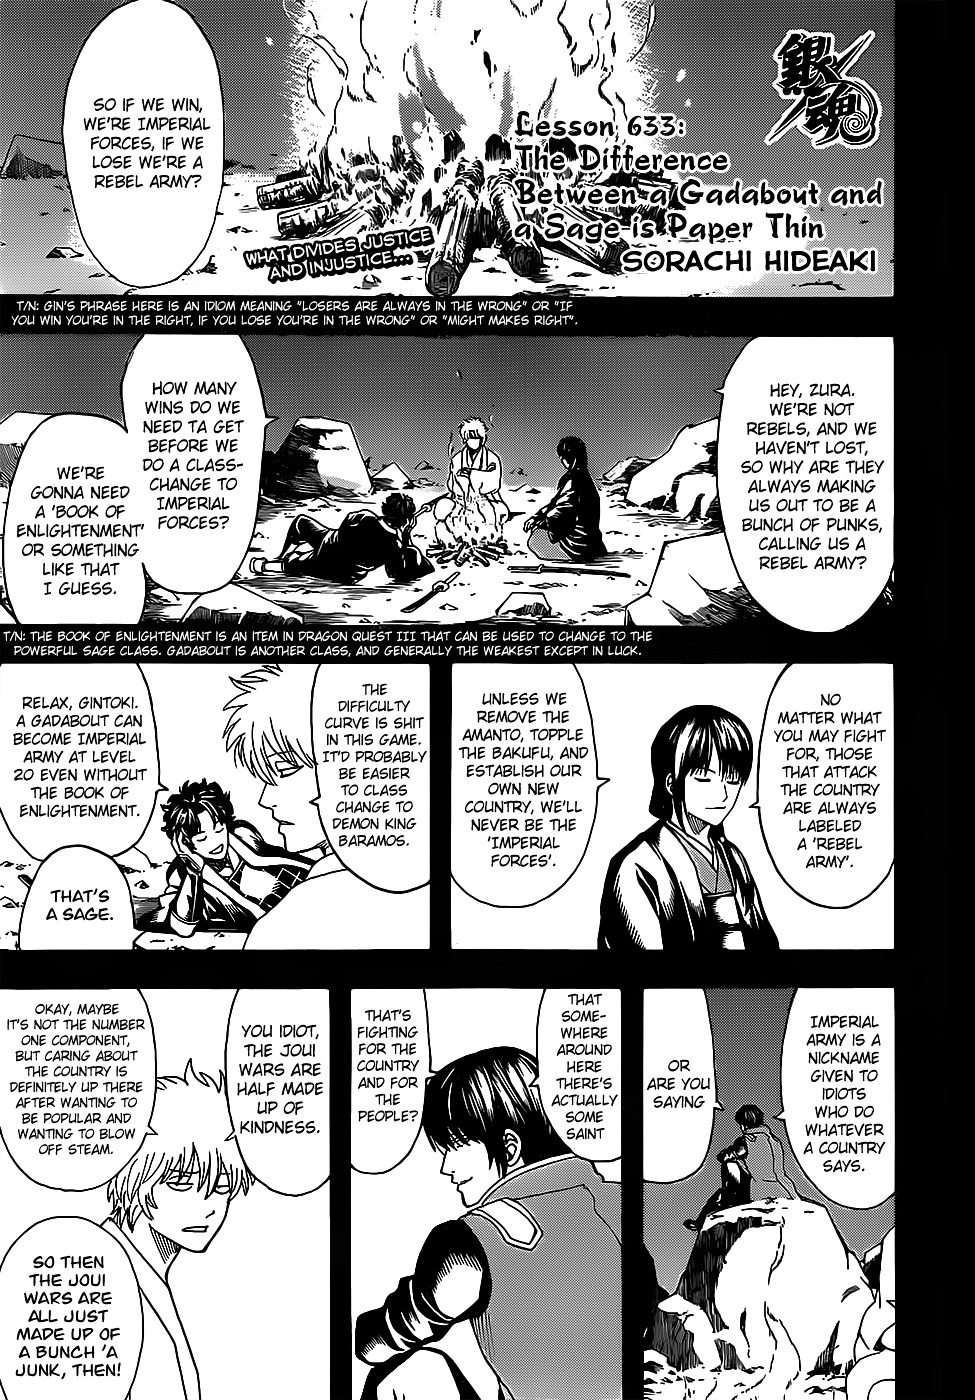 Gintama Vol.70 Chapter 633 V2 : The Difference Between A Gadabout And A Sage Is Paper Thin - Picture 1